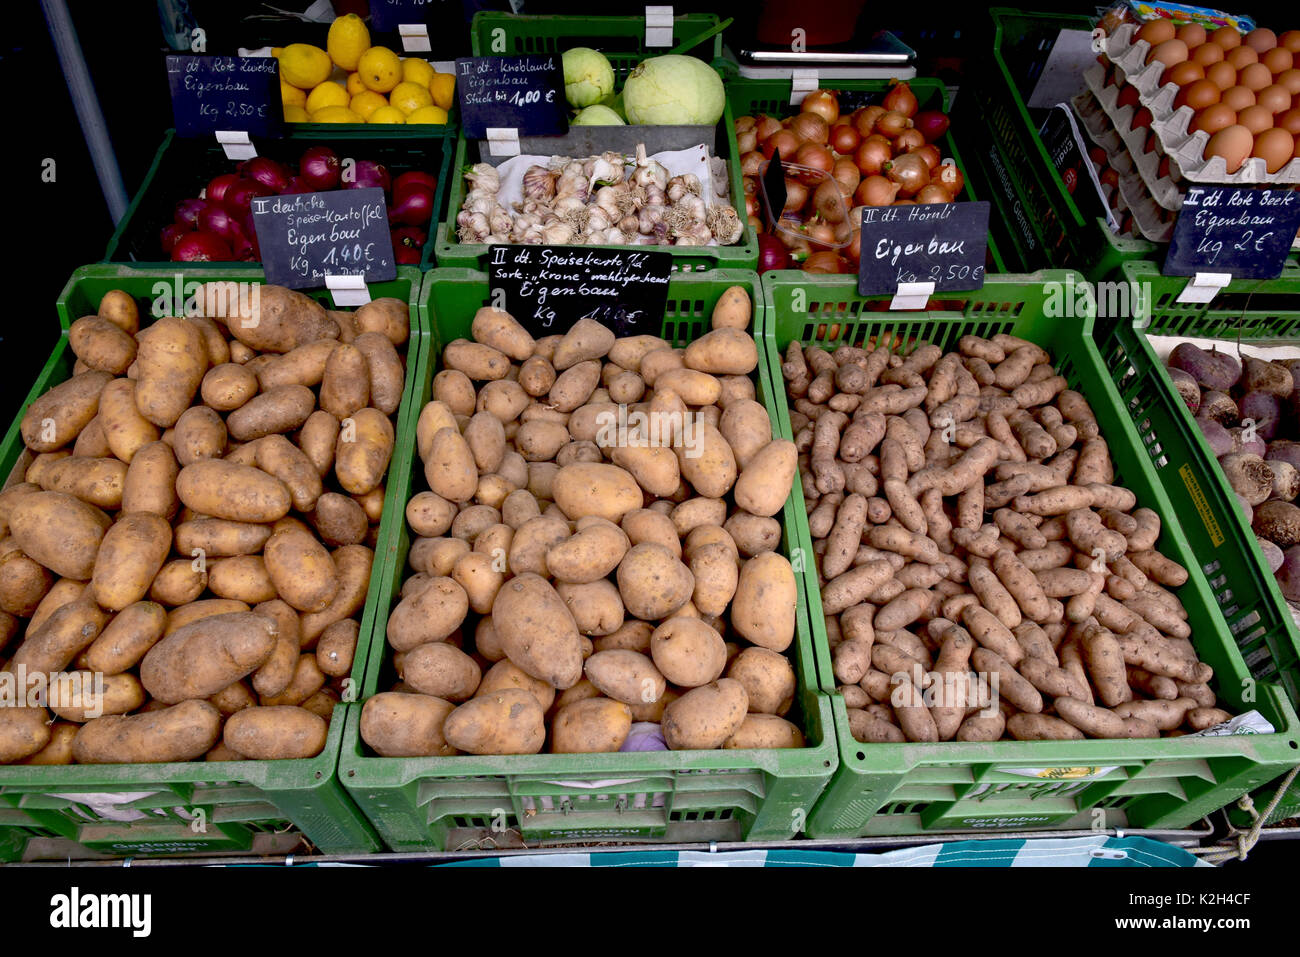 Market stall offering different sorts of potatos, garlic and onions Stock Photo